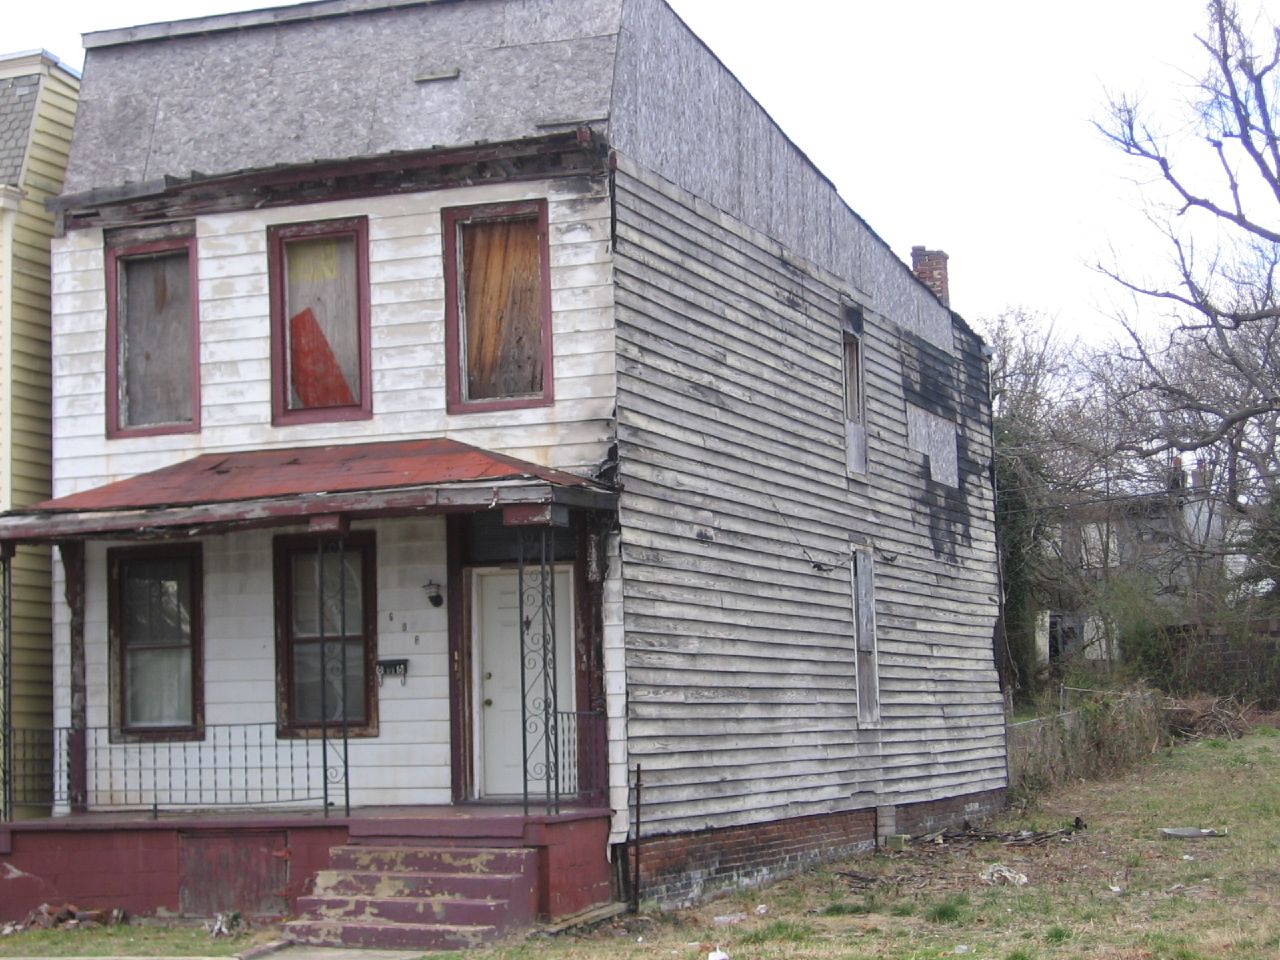 the house has two floors and is abandoned